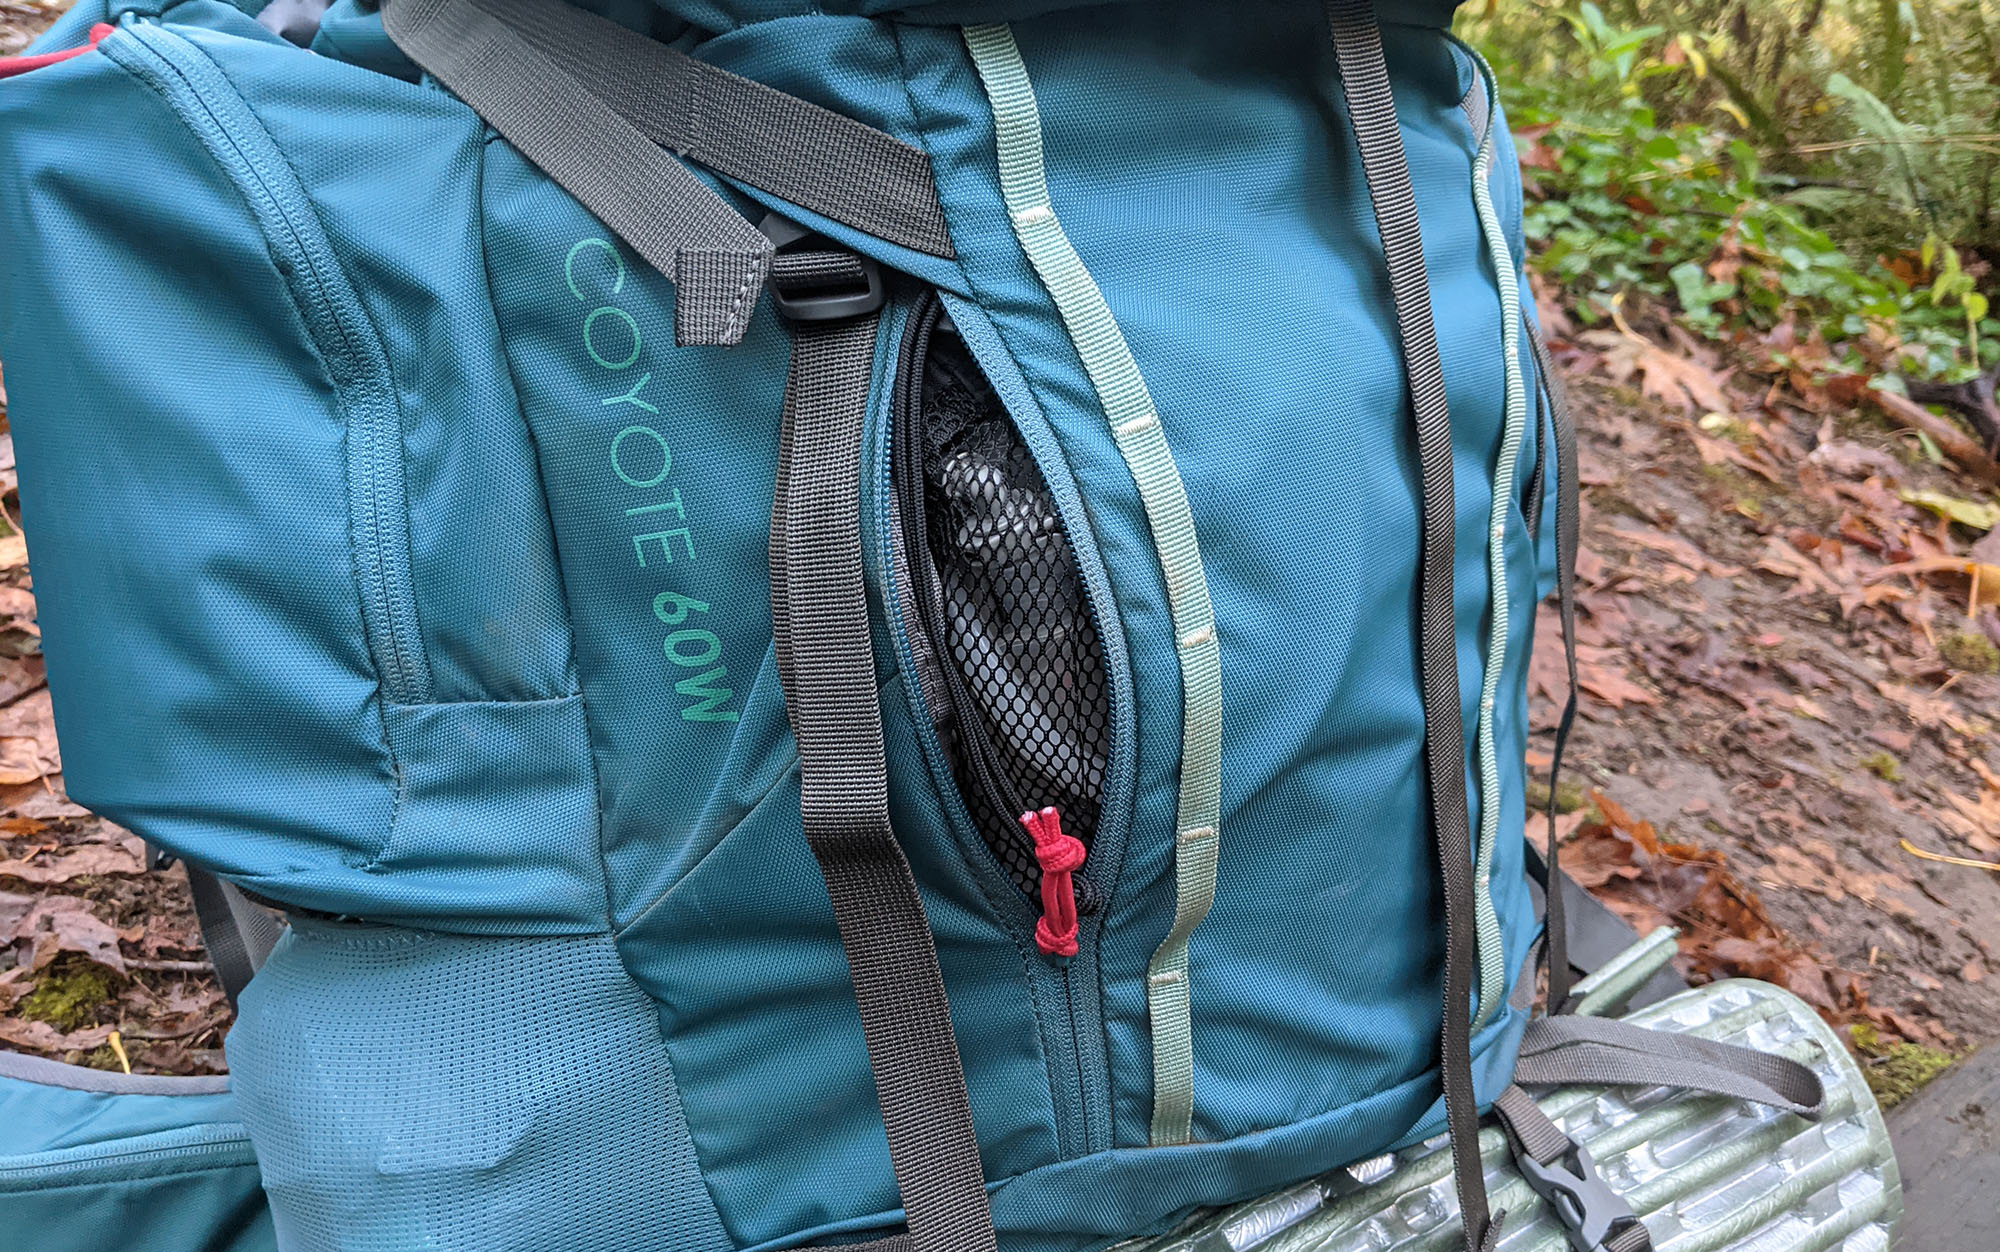 The back pocket of the Kelty Coyote has less capacity than typical mesh pockets, but provides additional protection for important items like water filters.